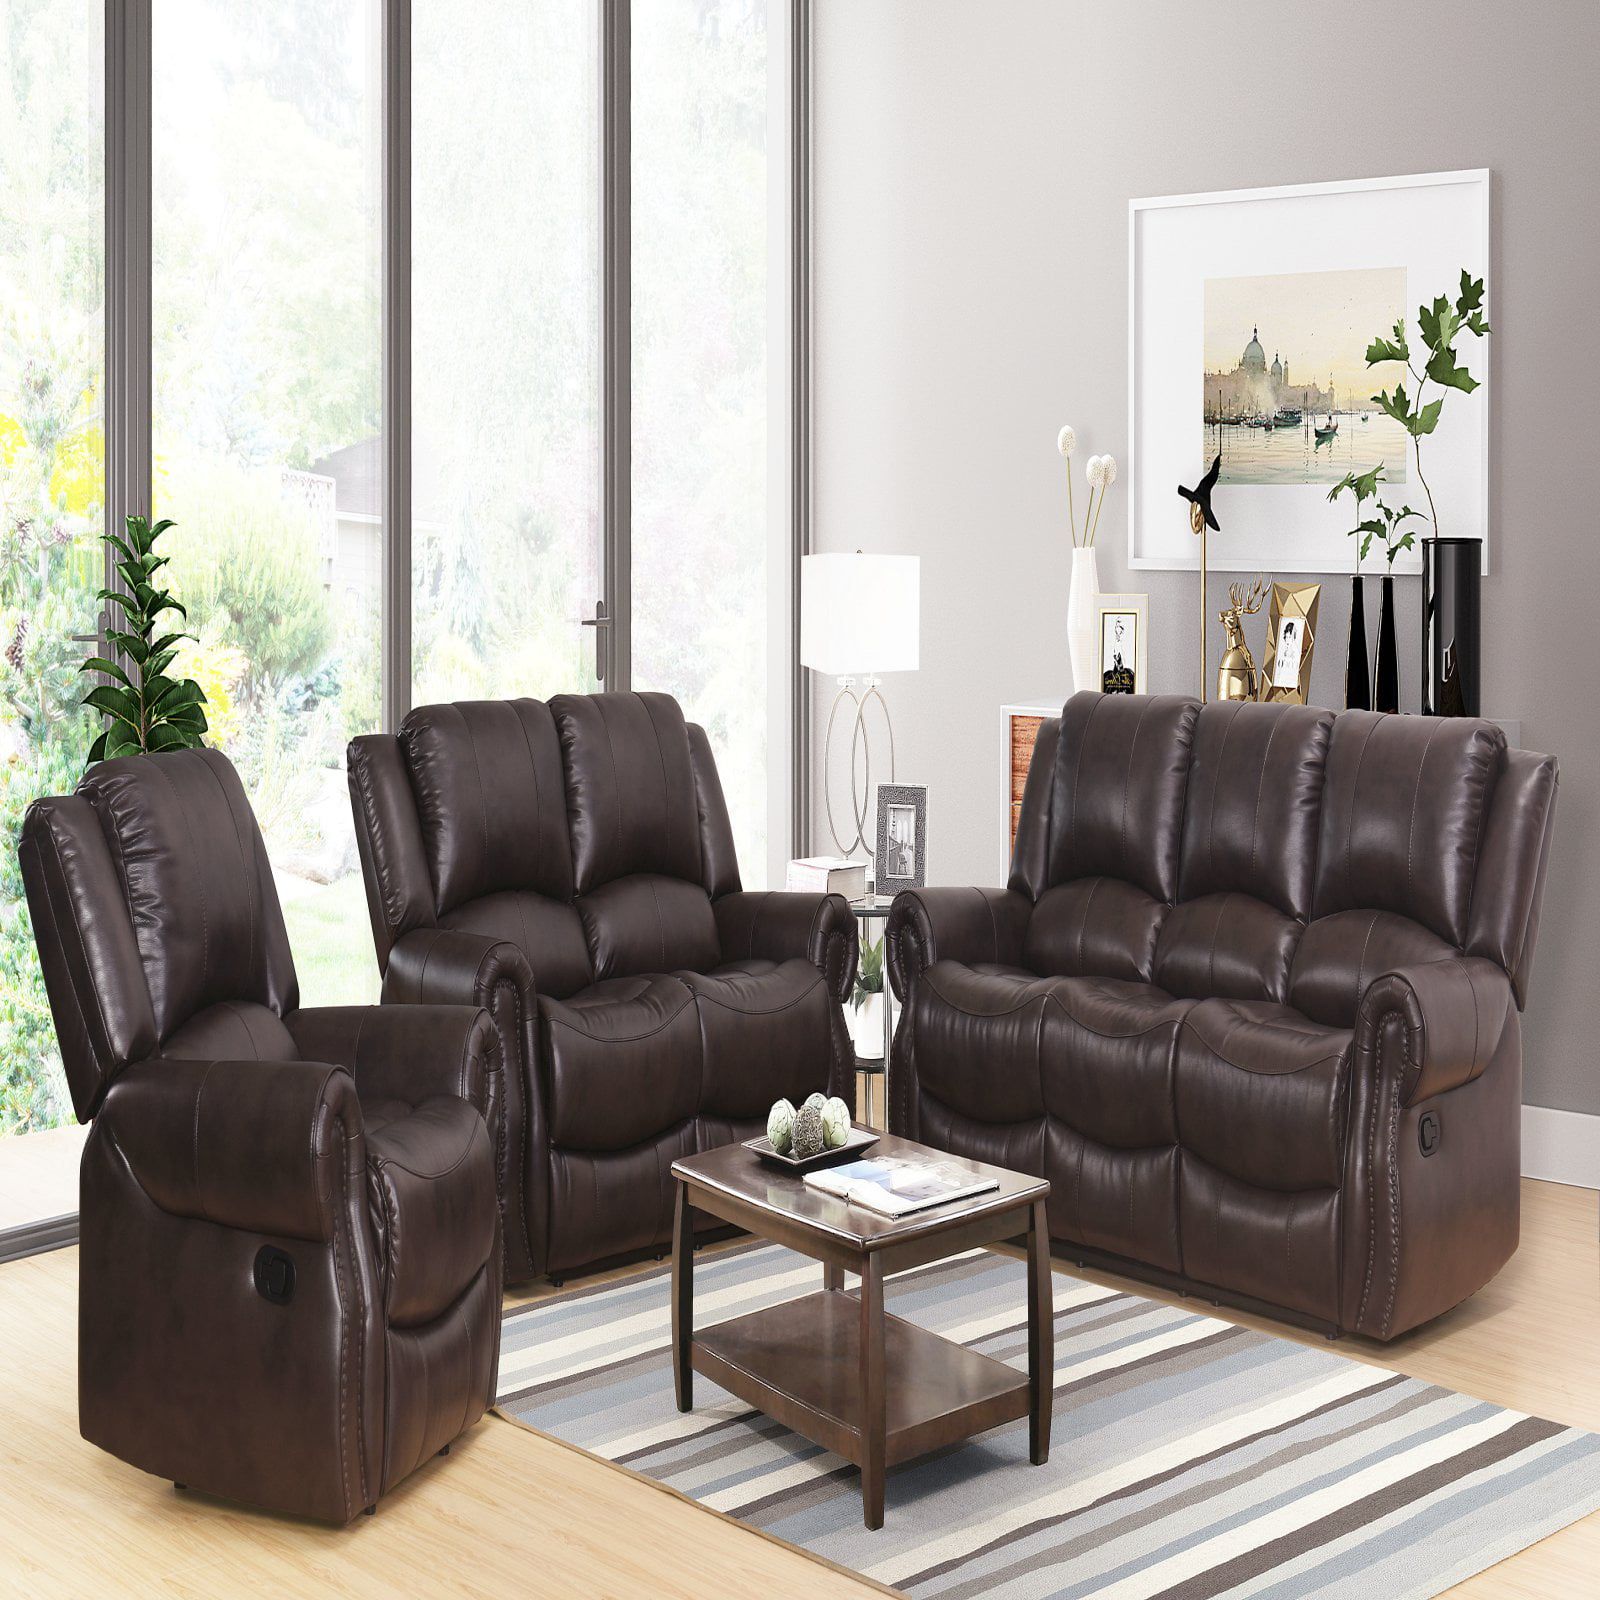 Abbyson Living Toya 3 Piece Faux Leather Reclining Sofa Set – Walmart Throughout Faux Leather Sofas (Gallery 7 of 21)